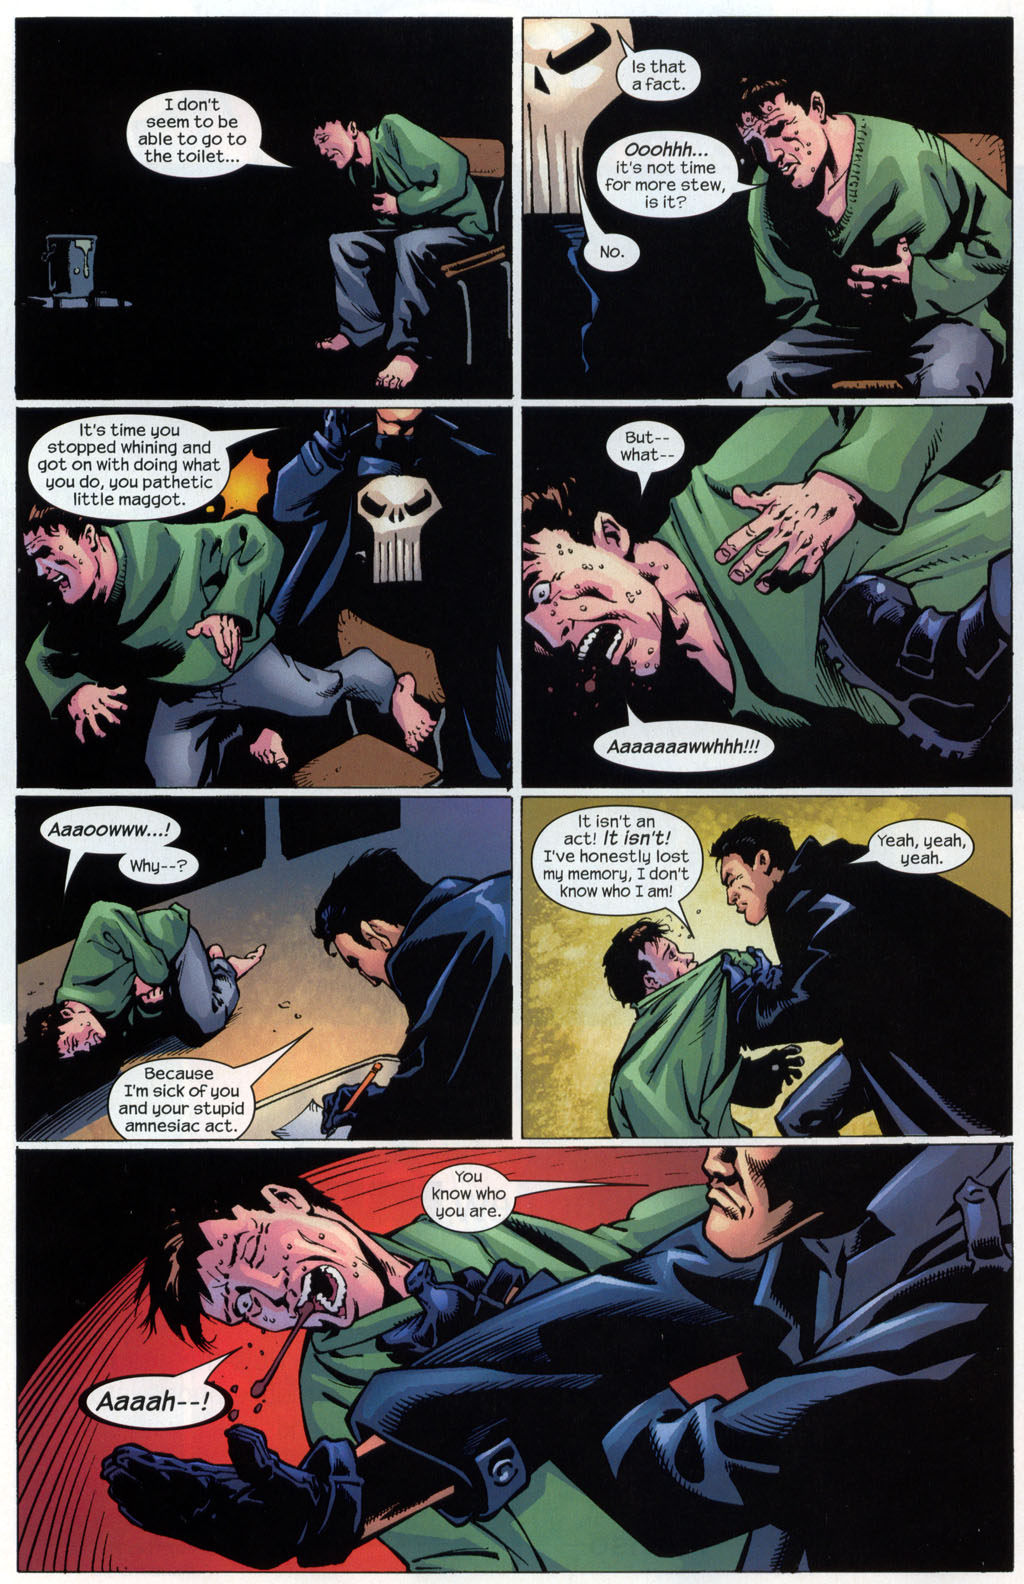 The Punisher (2001) issue 36 - Confederacy of Dunces #04 - Page 17